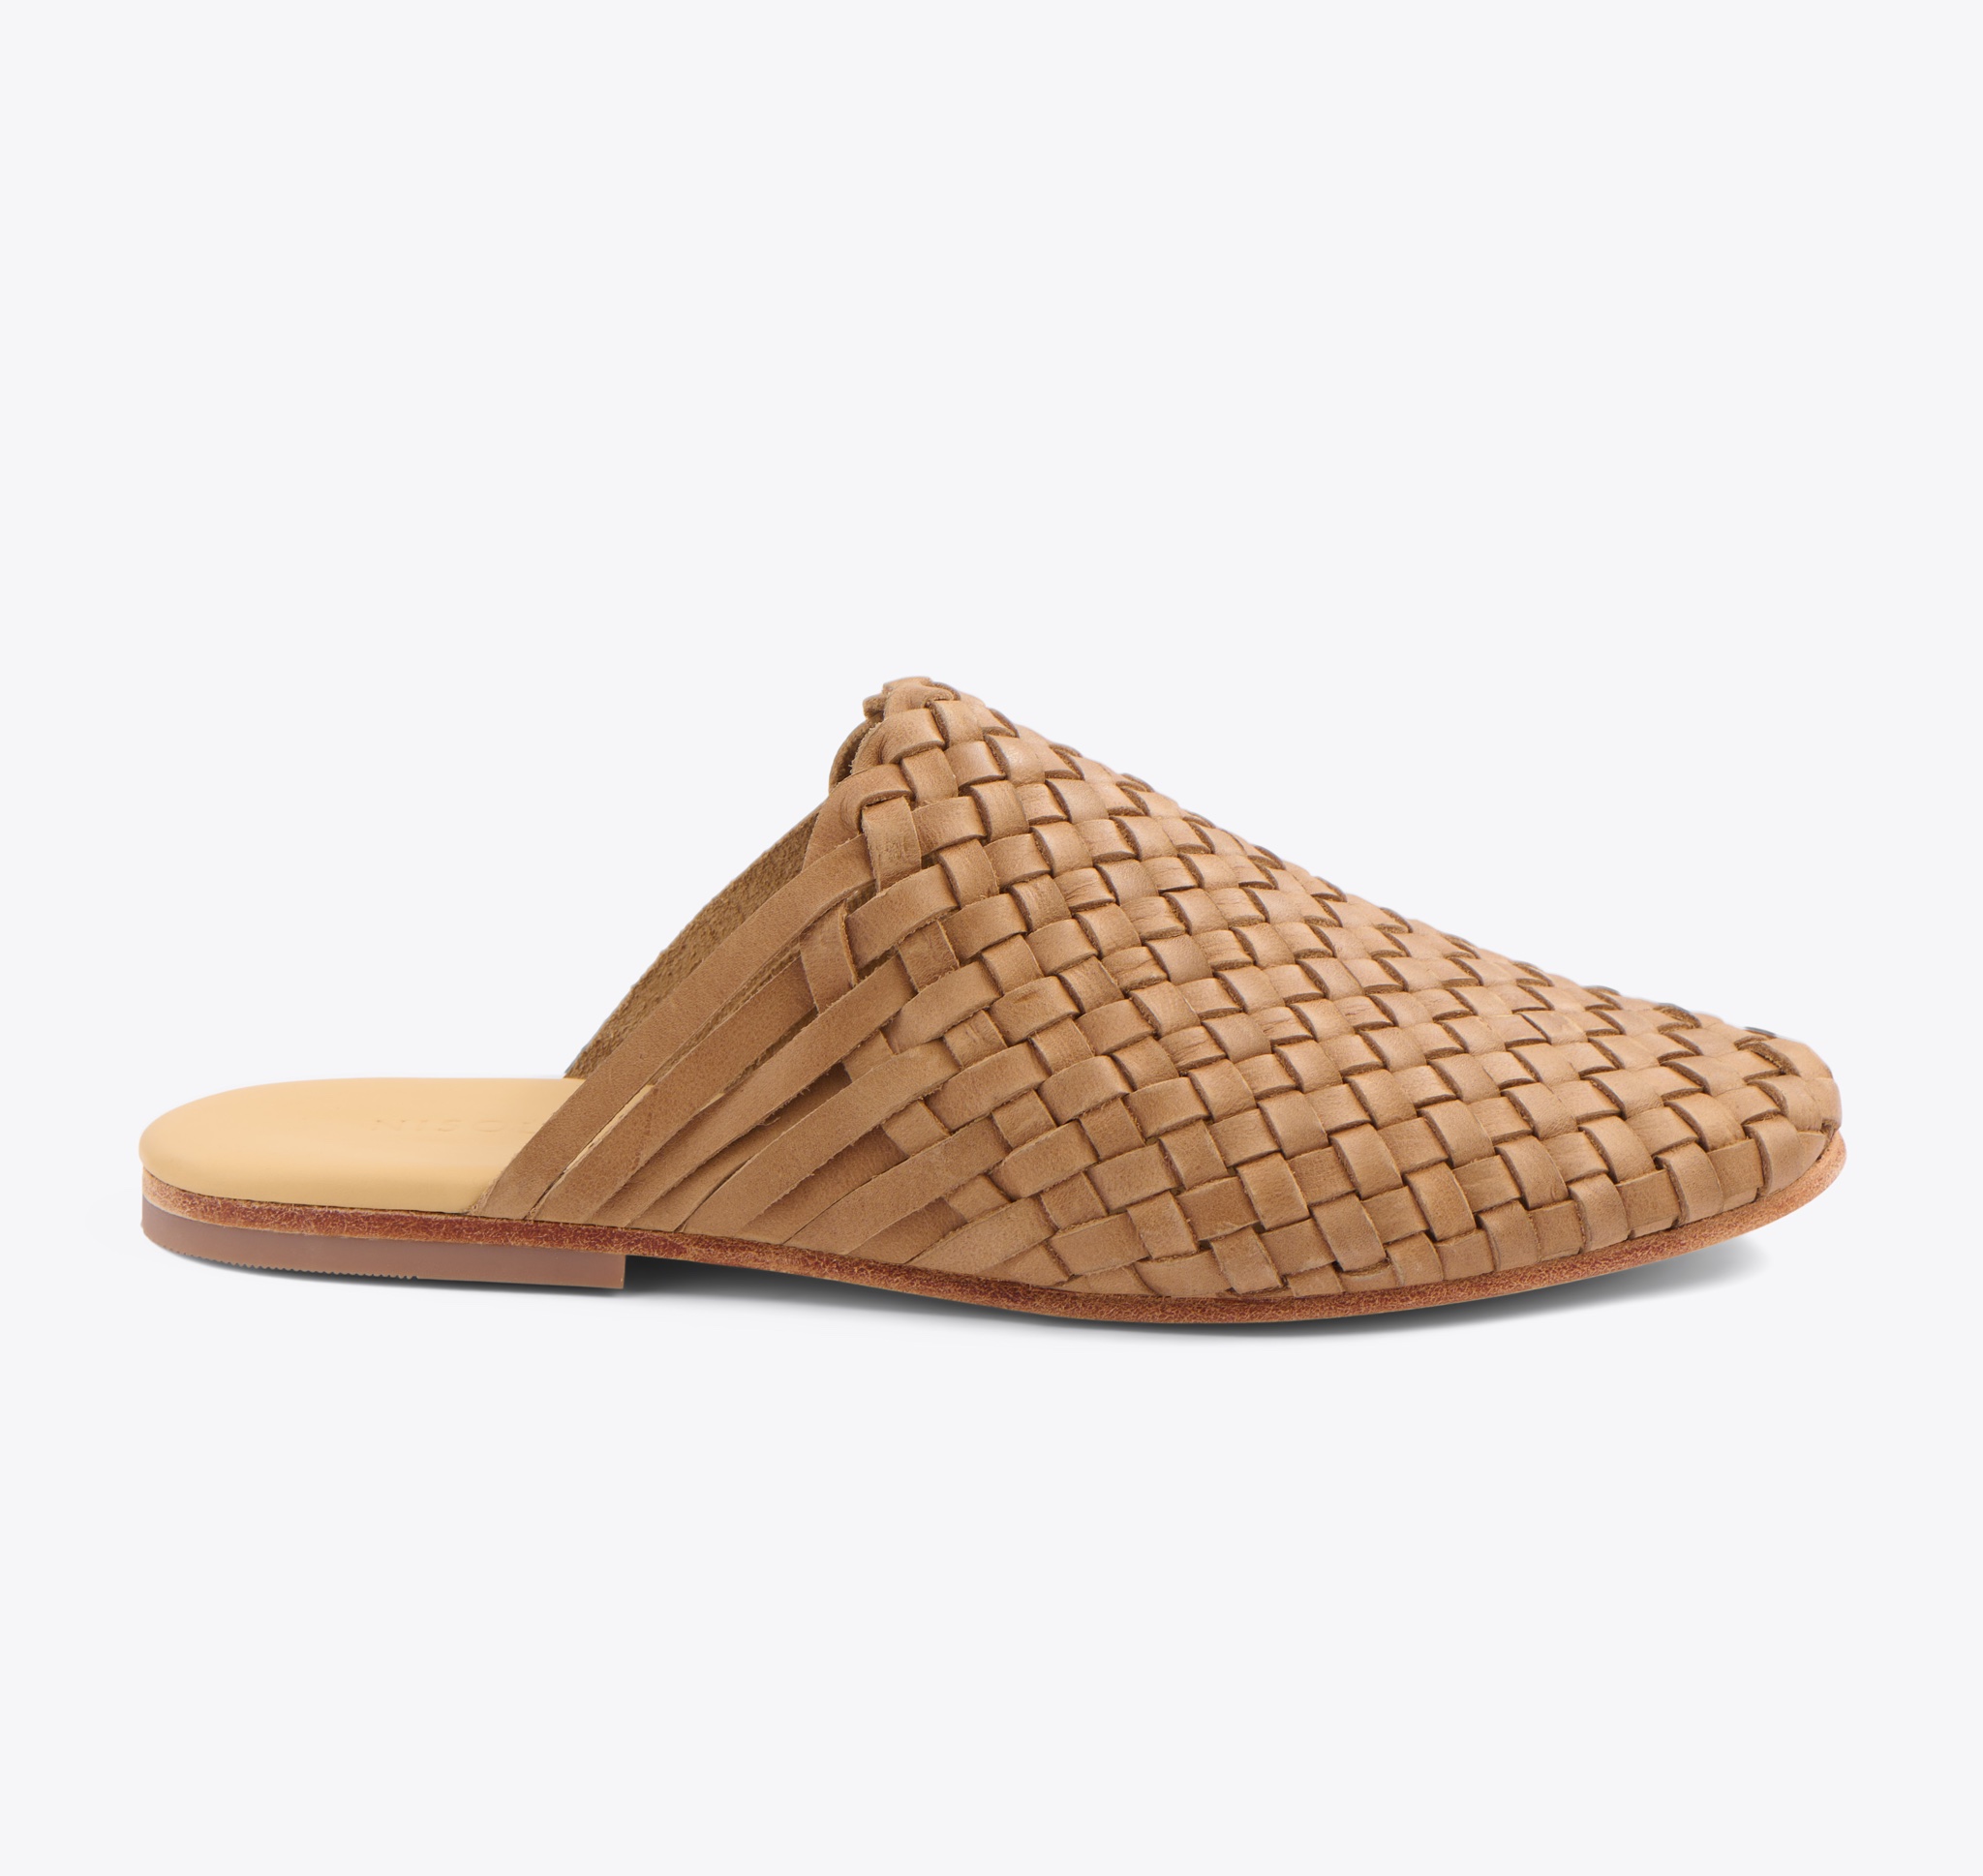 Nisolo Go-To Woven Slip On Woven Almond - Every Nisolo product is built on the foundation of comfort, function, and design. 